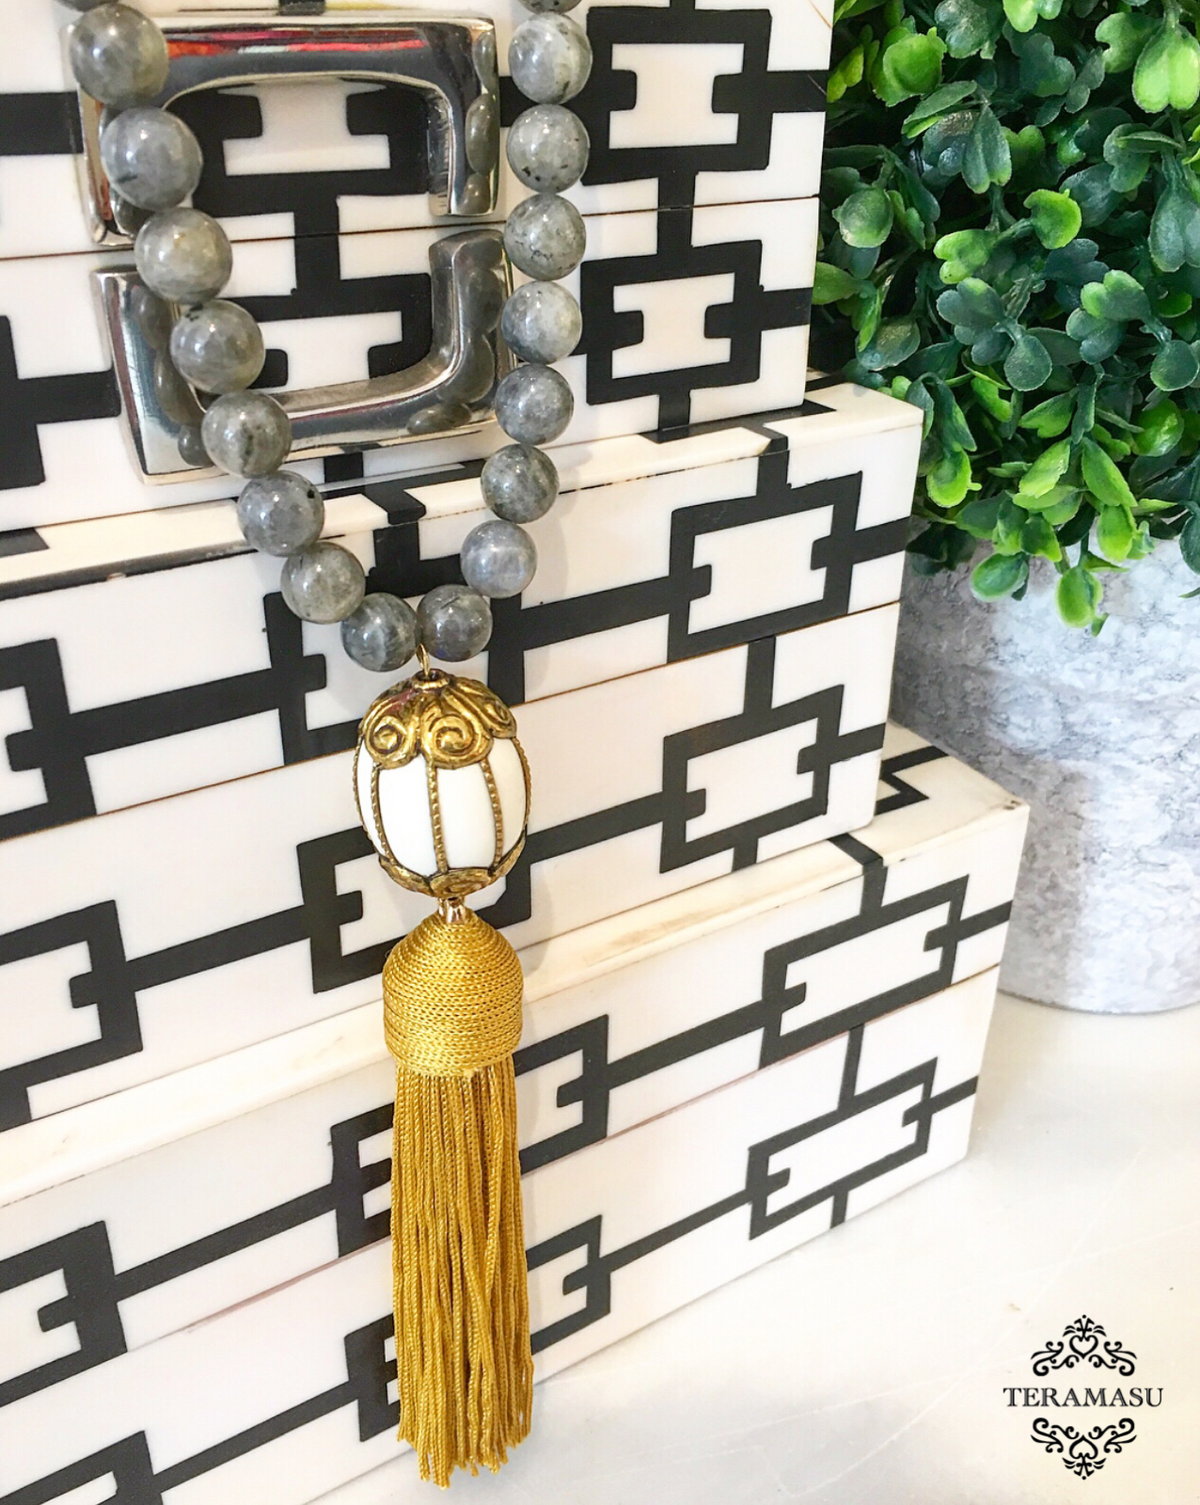 Chic Peek: Gorgeous & New Handmade Designer Teramasu Labradorite Necklace with One-of-a-Kind White & Gold Pendant and Gold Tassel